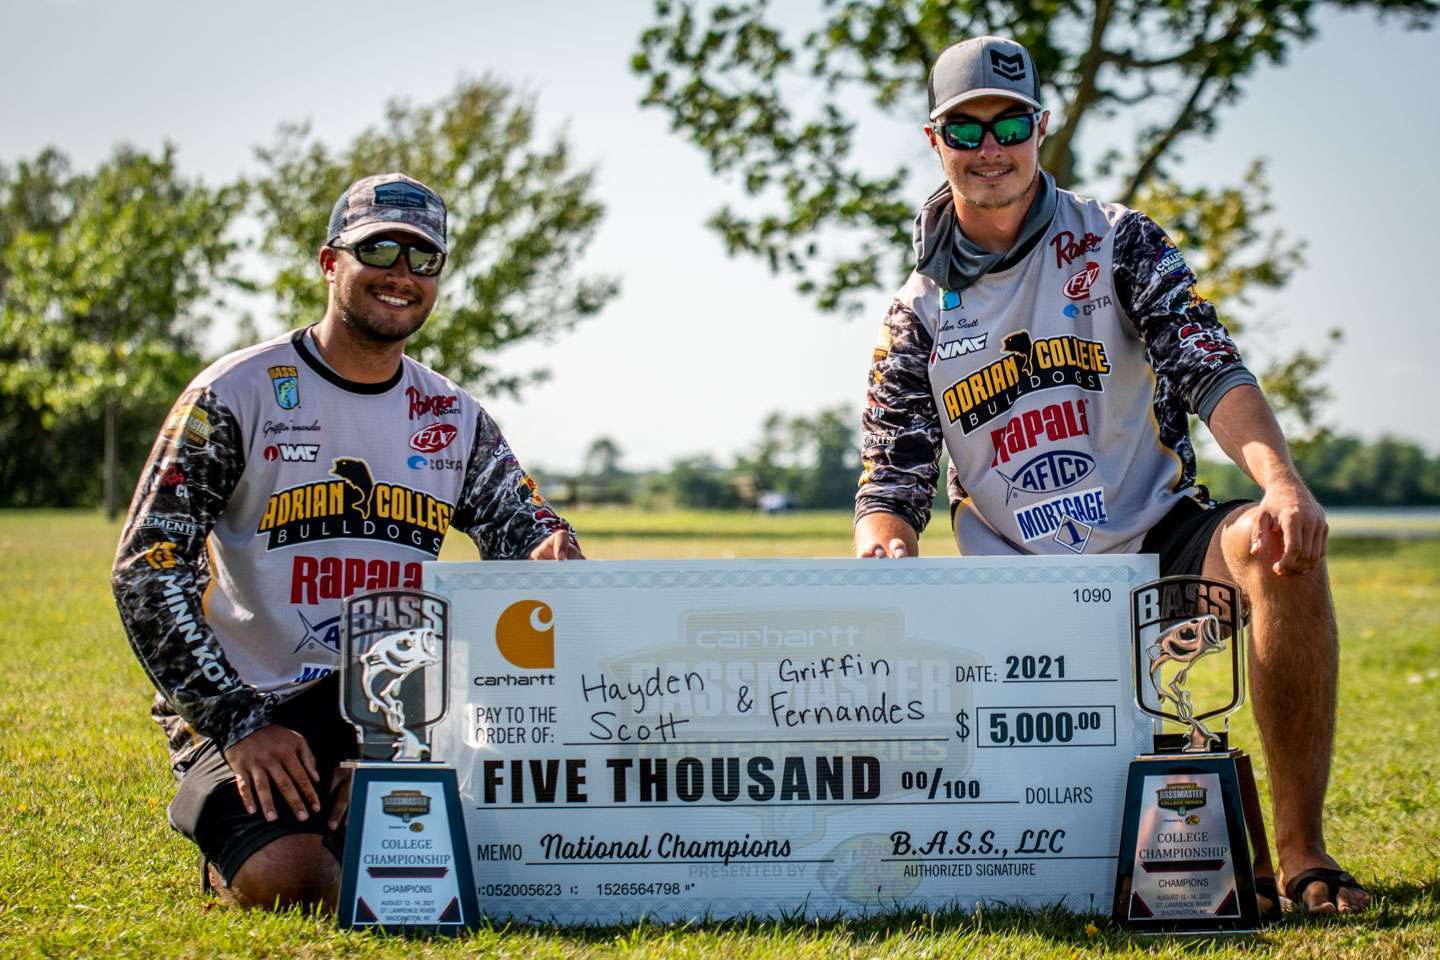 <b>Hayden Scott - Griffin Fernandes, Adrian College</b><br>  The talented duo of Hayden Scott and Griffin Fernandes of Adrian College are the reigning Bassmaster College Series National Champions. On top of their dramatic National Championship victory, the duo also notched two Top 15 finishes in the regular season, including a second place finish at Smith Lake. These anglers have the talent to become household names before too long. 